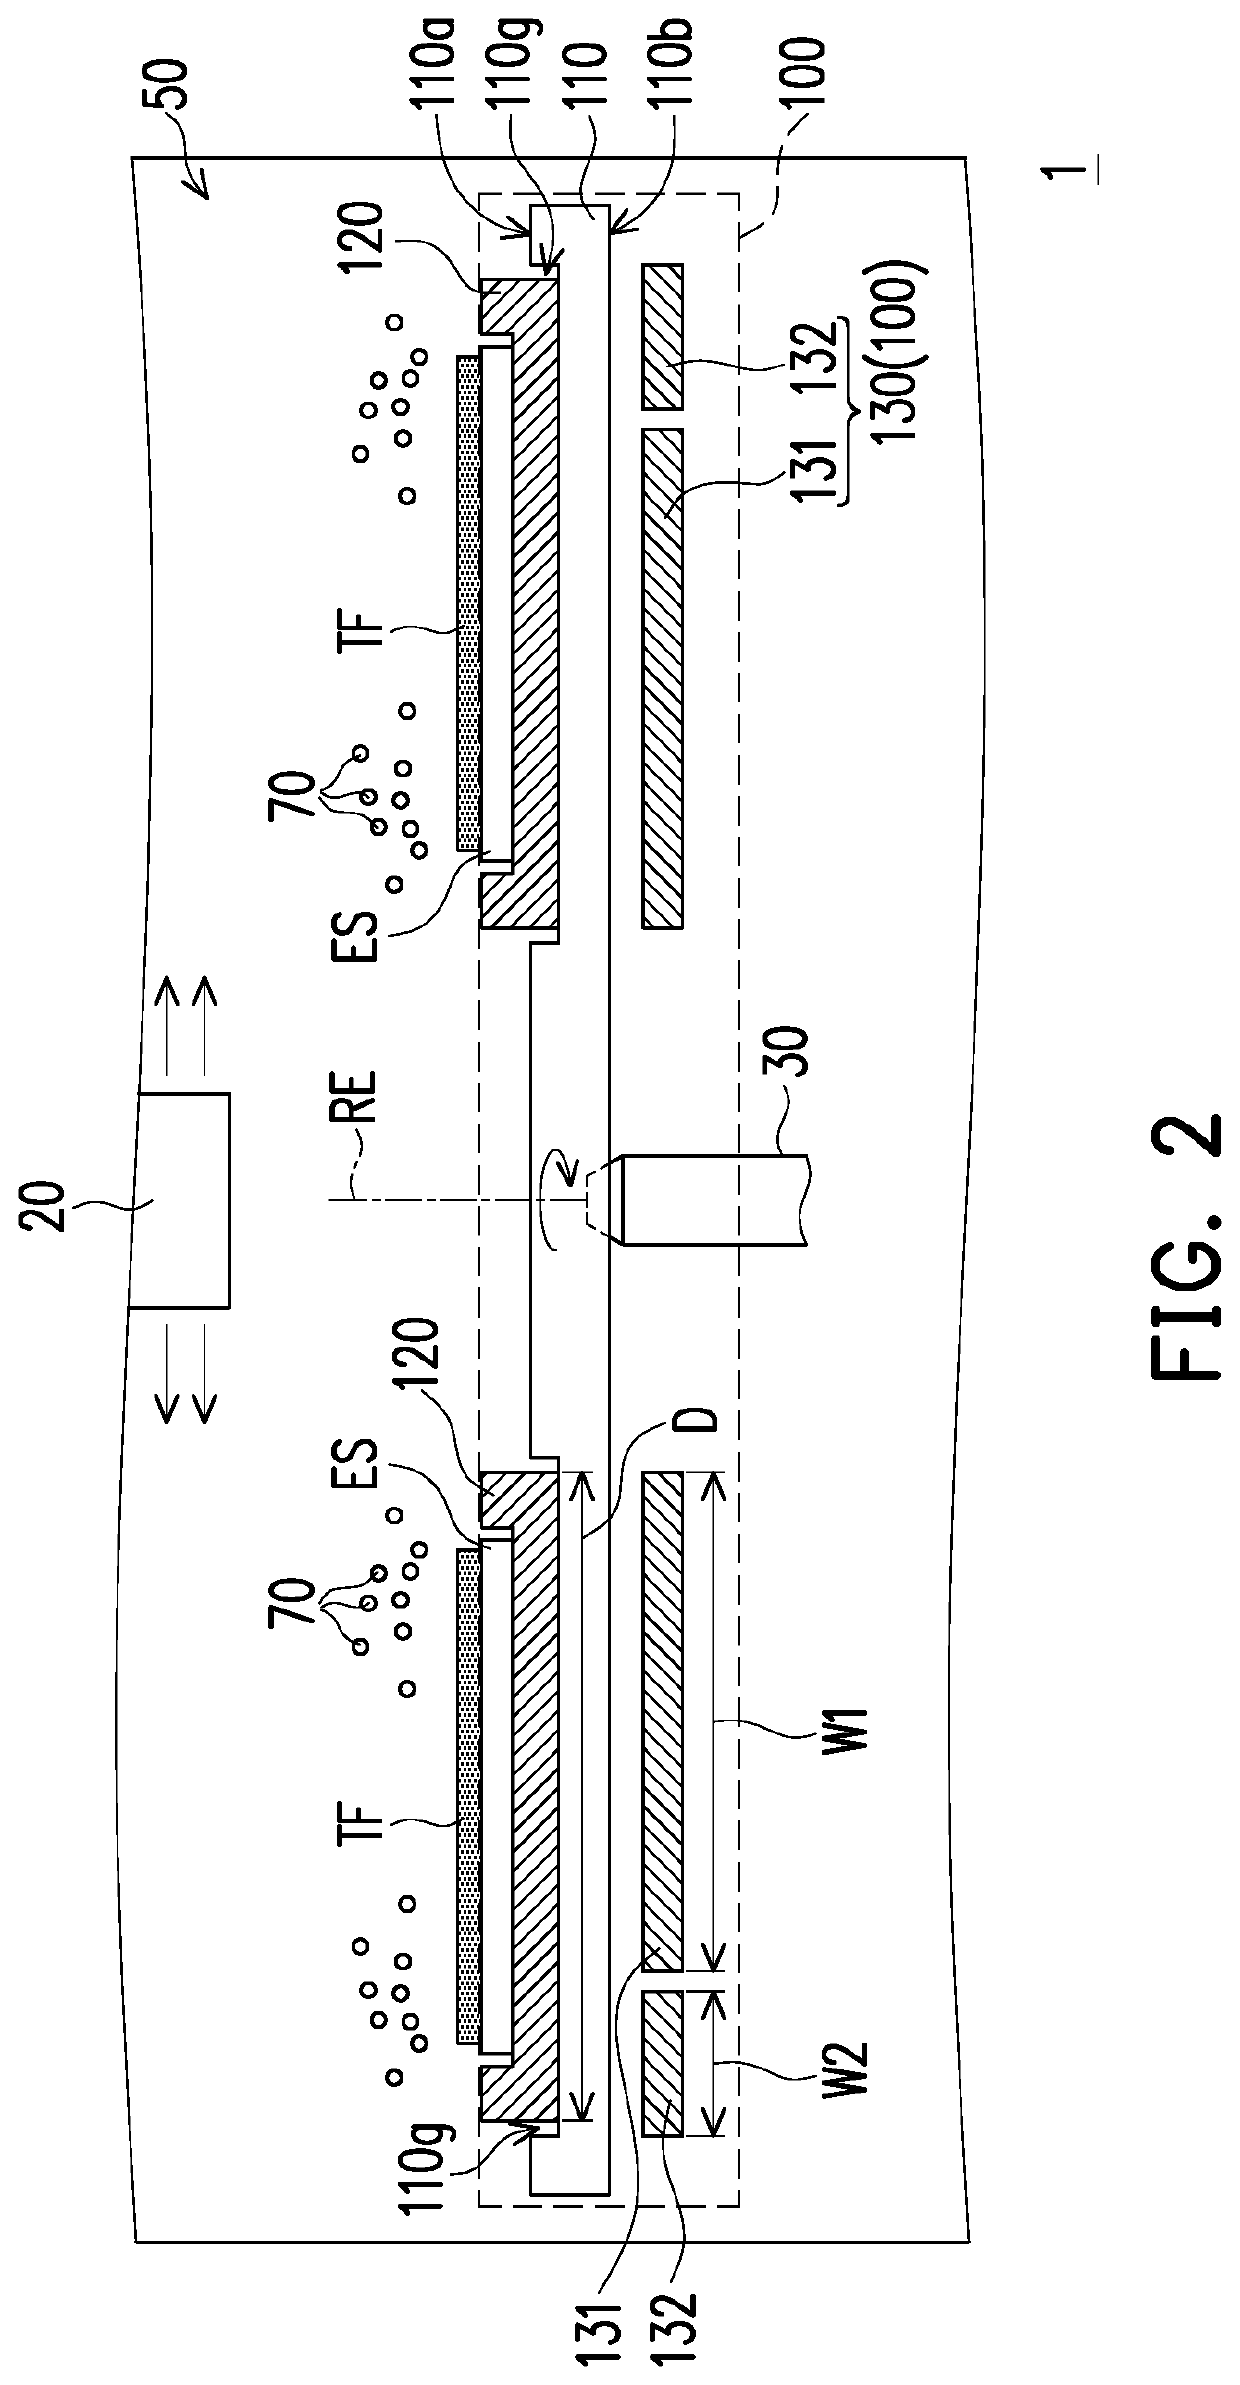 Heating apparatus and chemical vapor deposition system